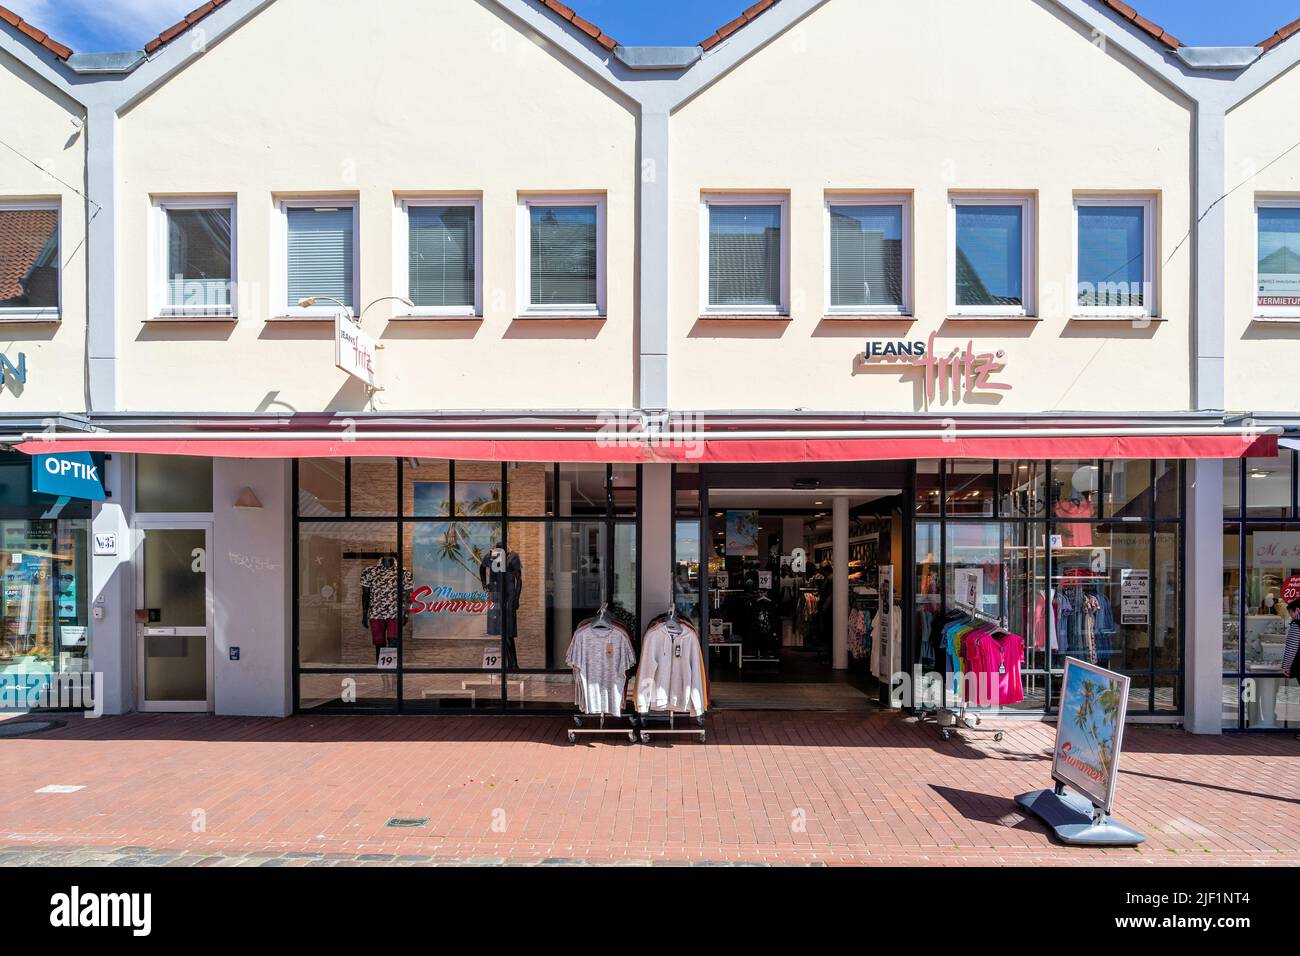 Jeans Fritz store in Kappeln, Germany Stock Photo